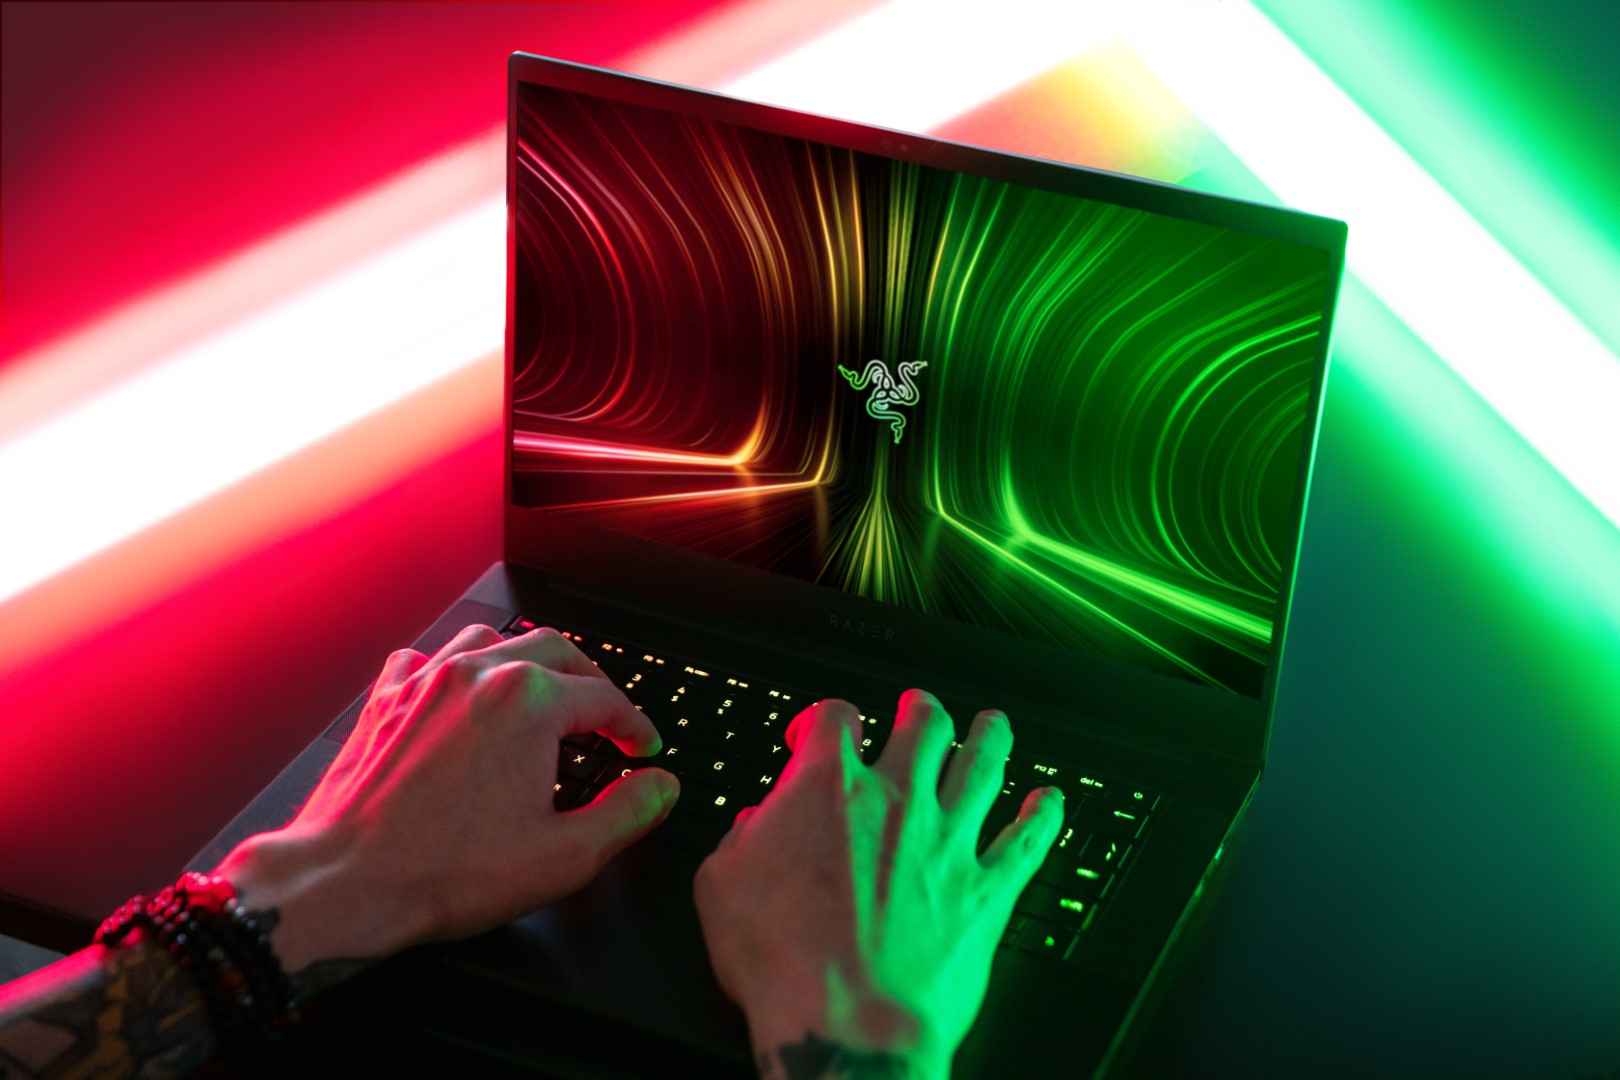 Razer is going red: Blade 14 is back from the dead with 100 W TGP GeForce RTX 3080 graphics and a nm Ryzen 9 5900HX Zen 3 CPU - NotebookCheck.net News